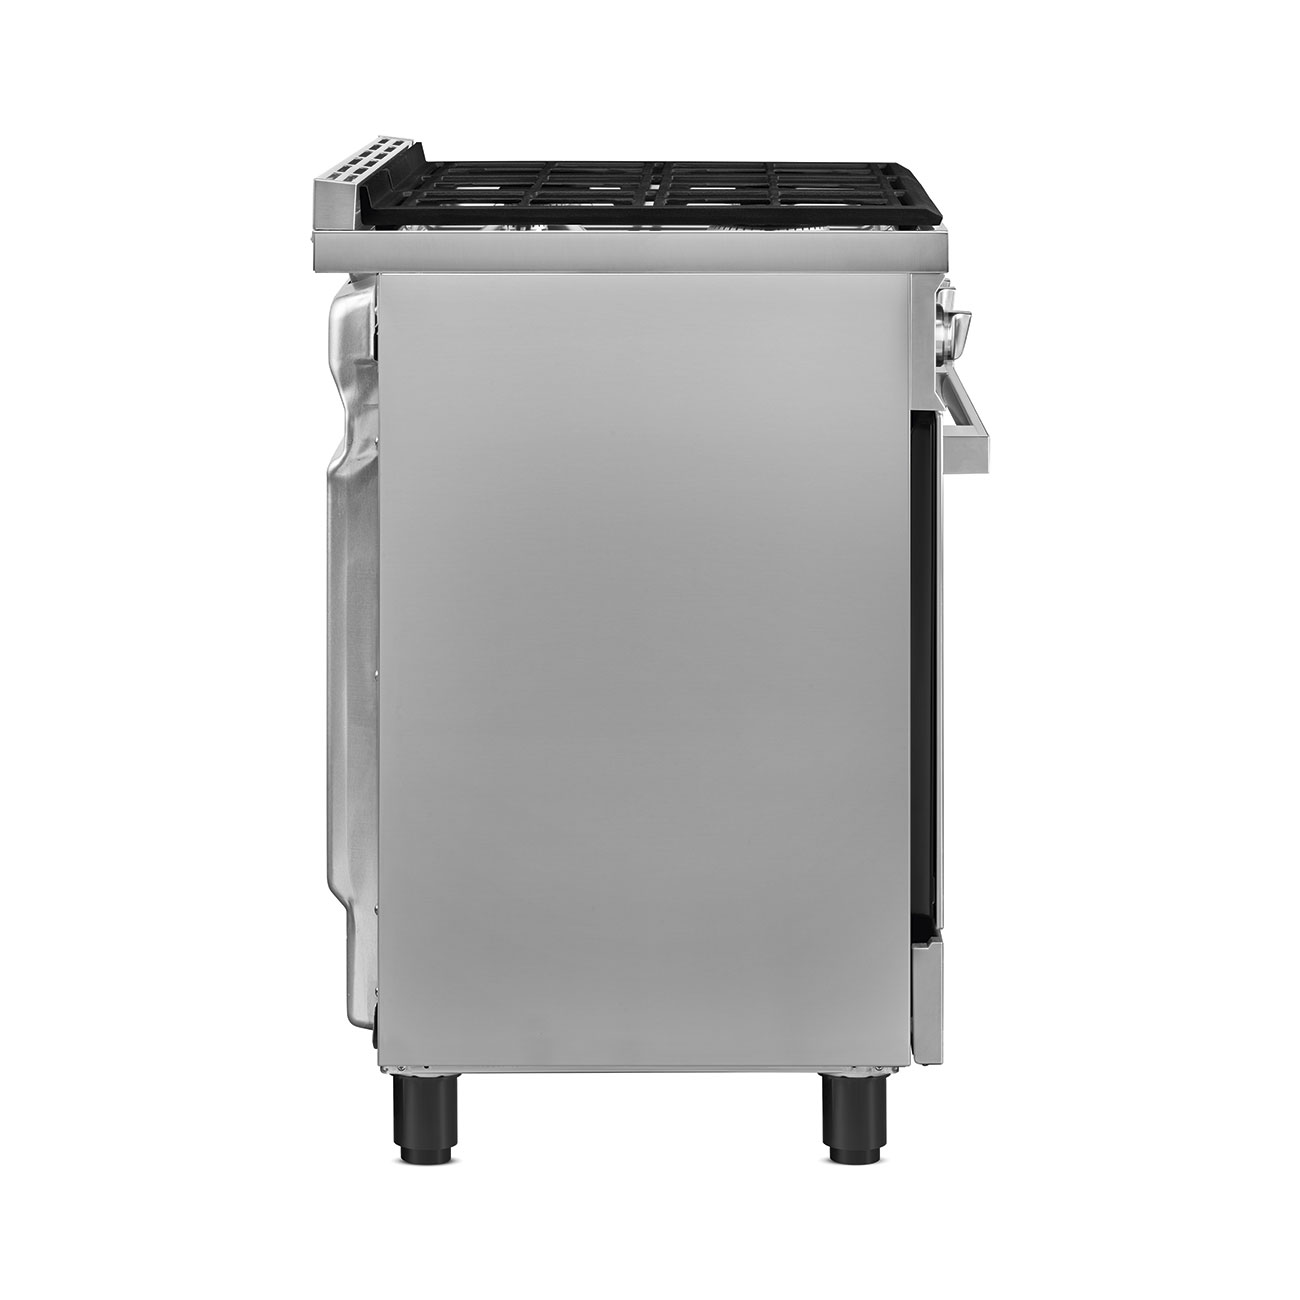 Smeg Stainless steel Cooker with Gas Hob_10